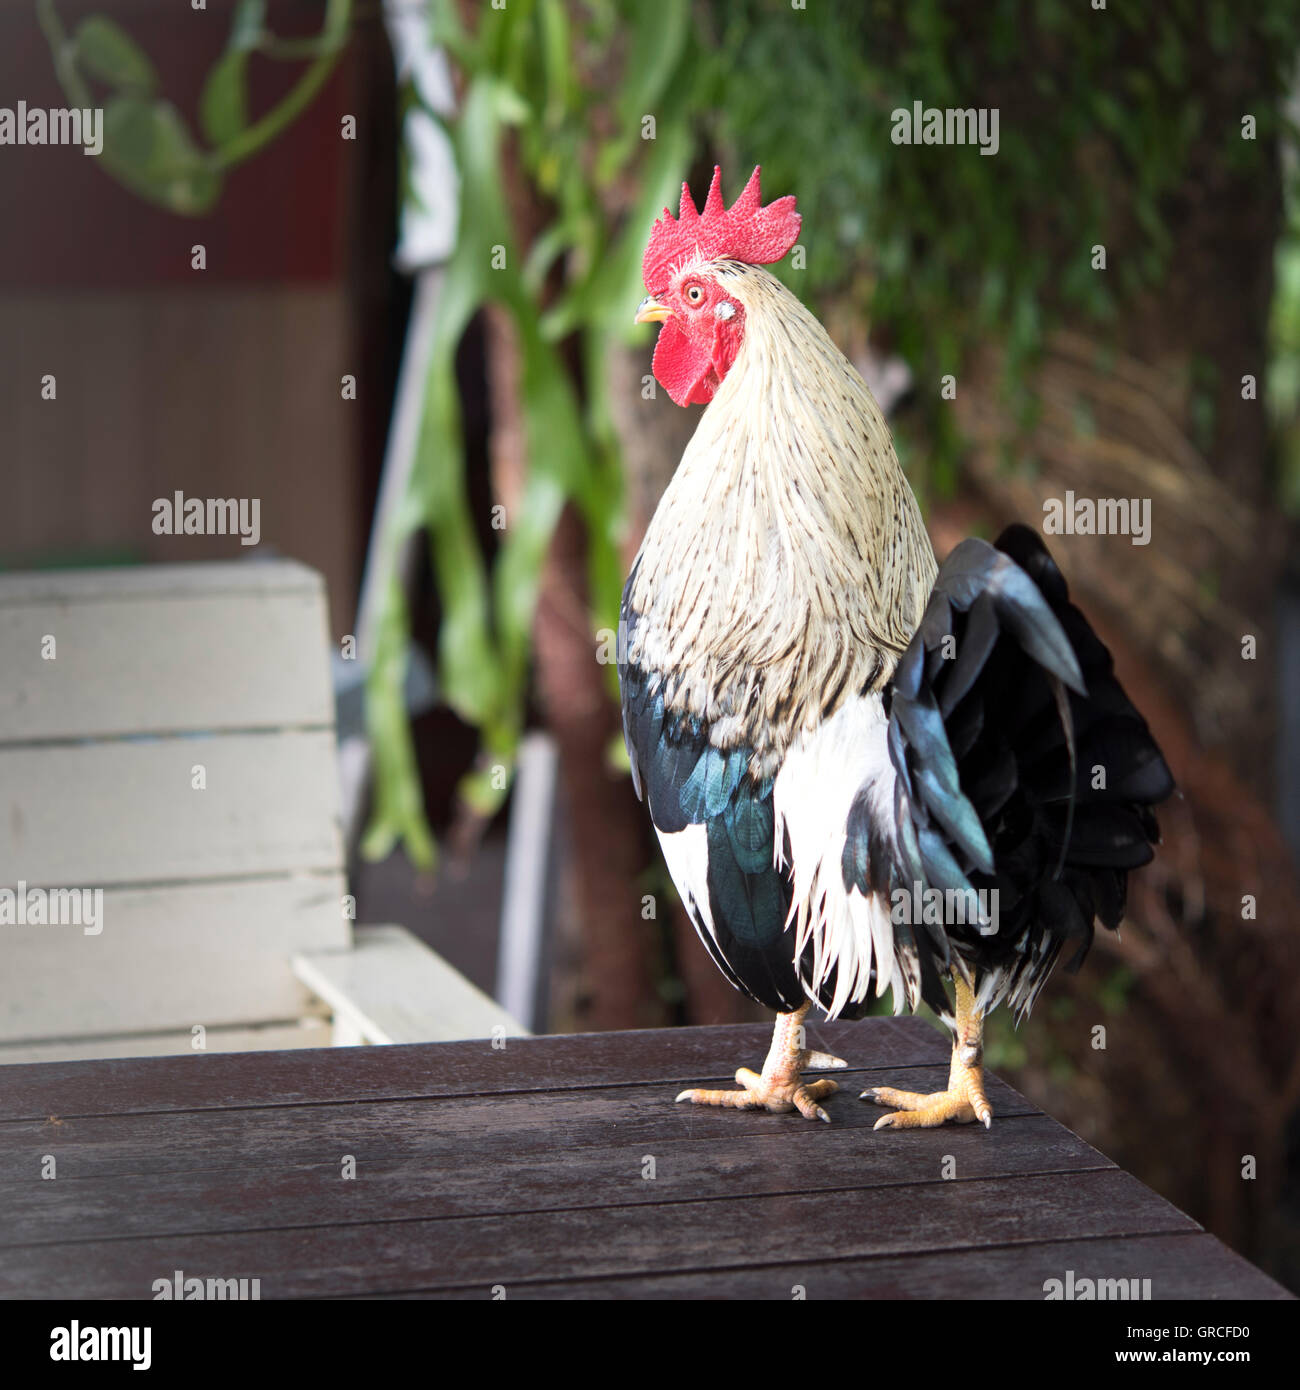 Rooster standing on the edge of a wooden table, showing off its beautiful white, black and iridescent feathers. Stock Photo